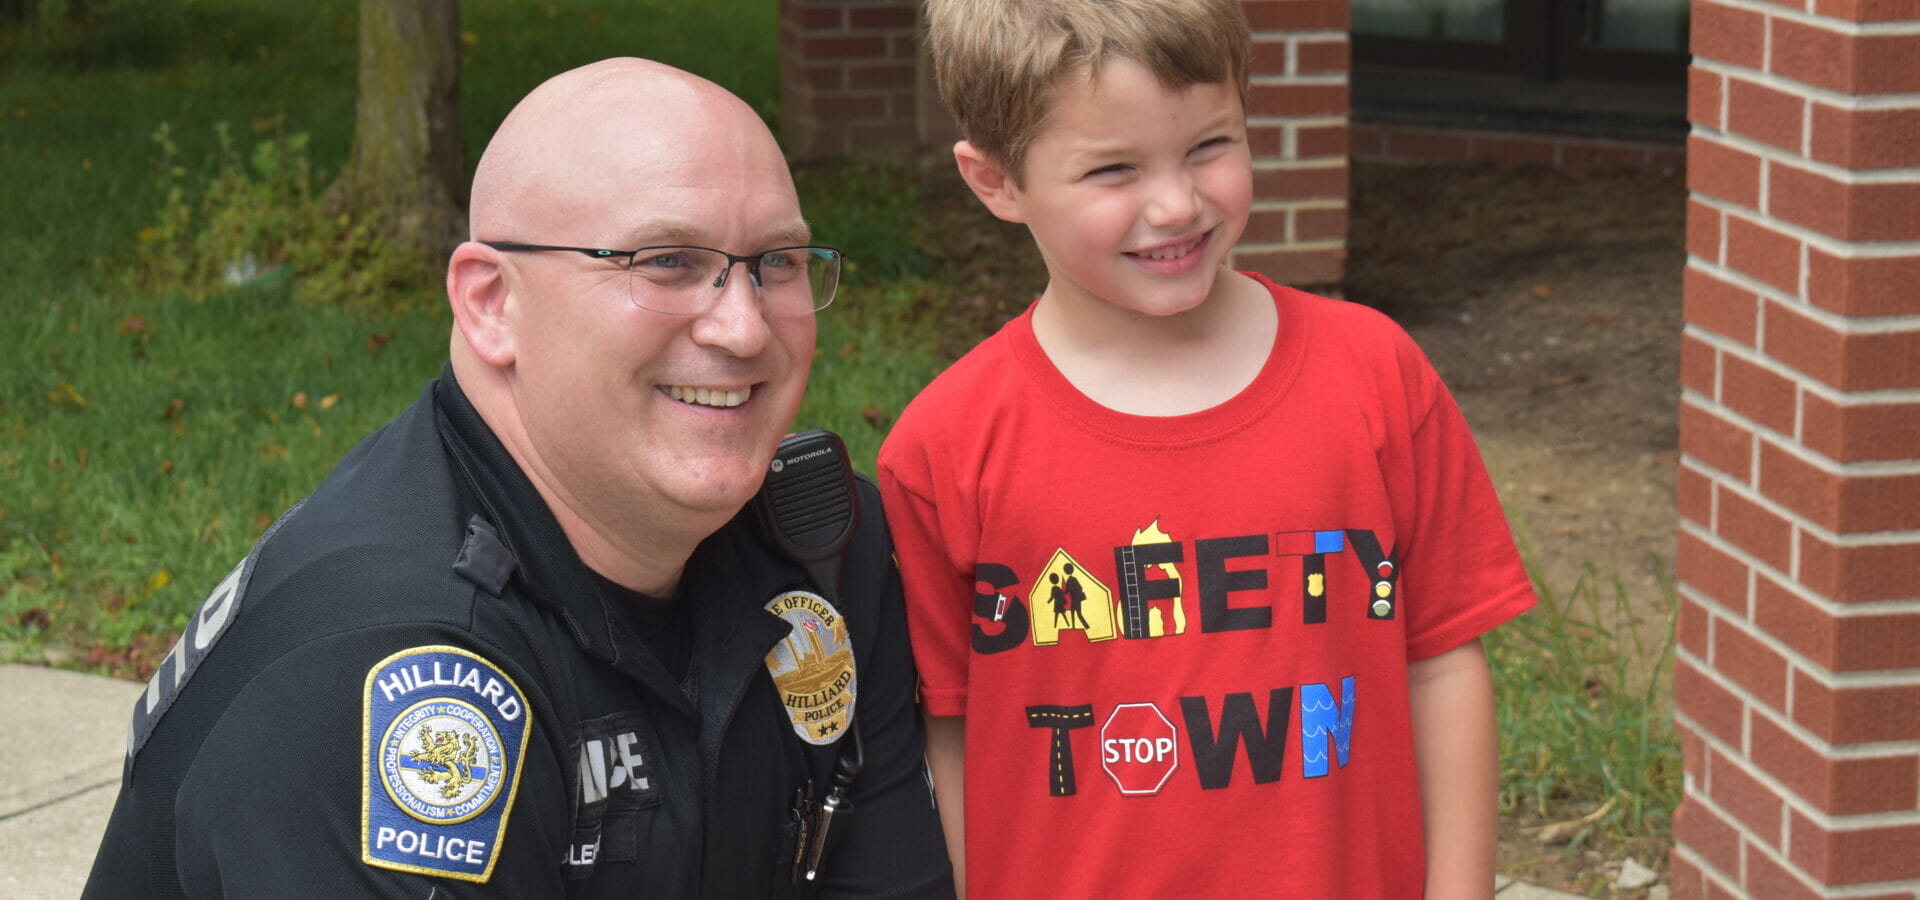 Boy and officer posing